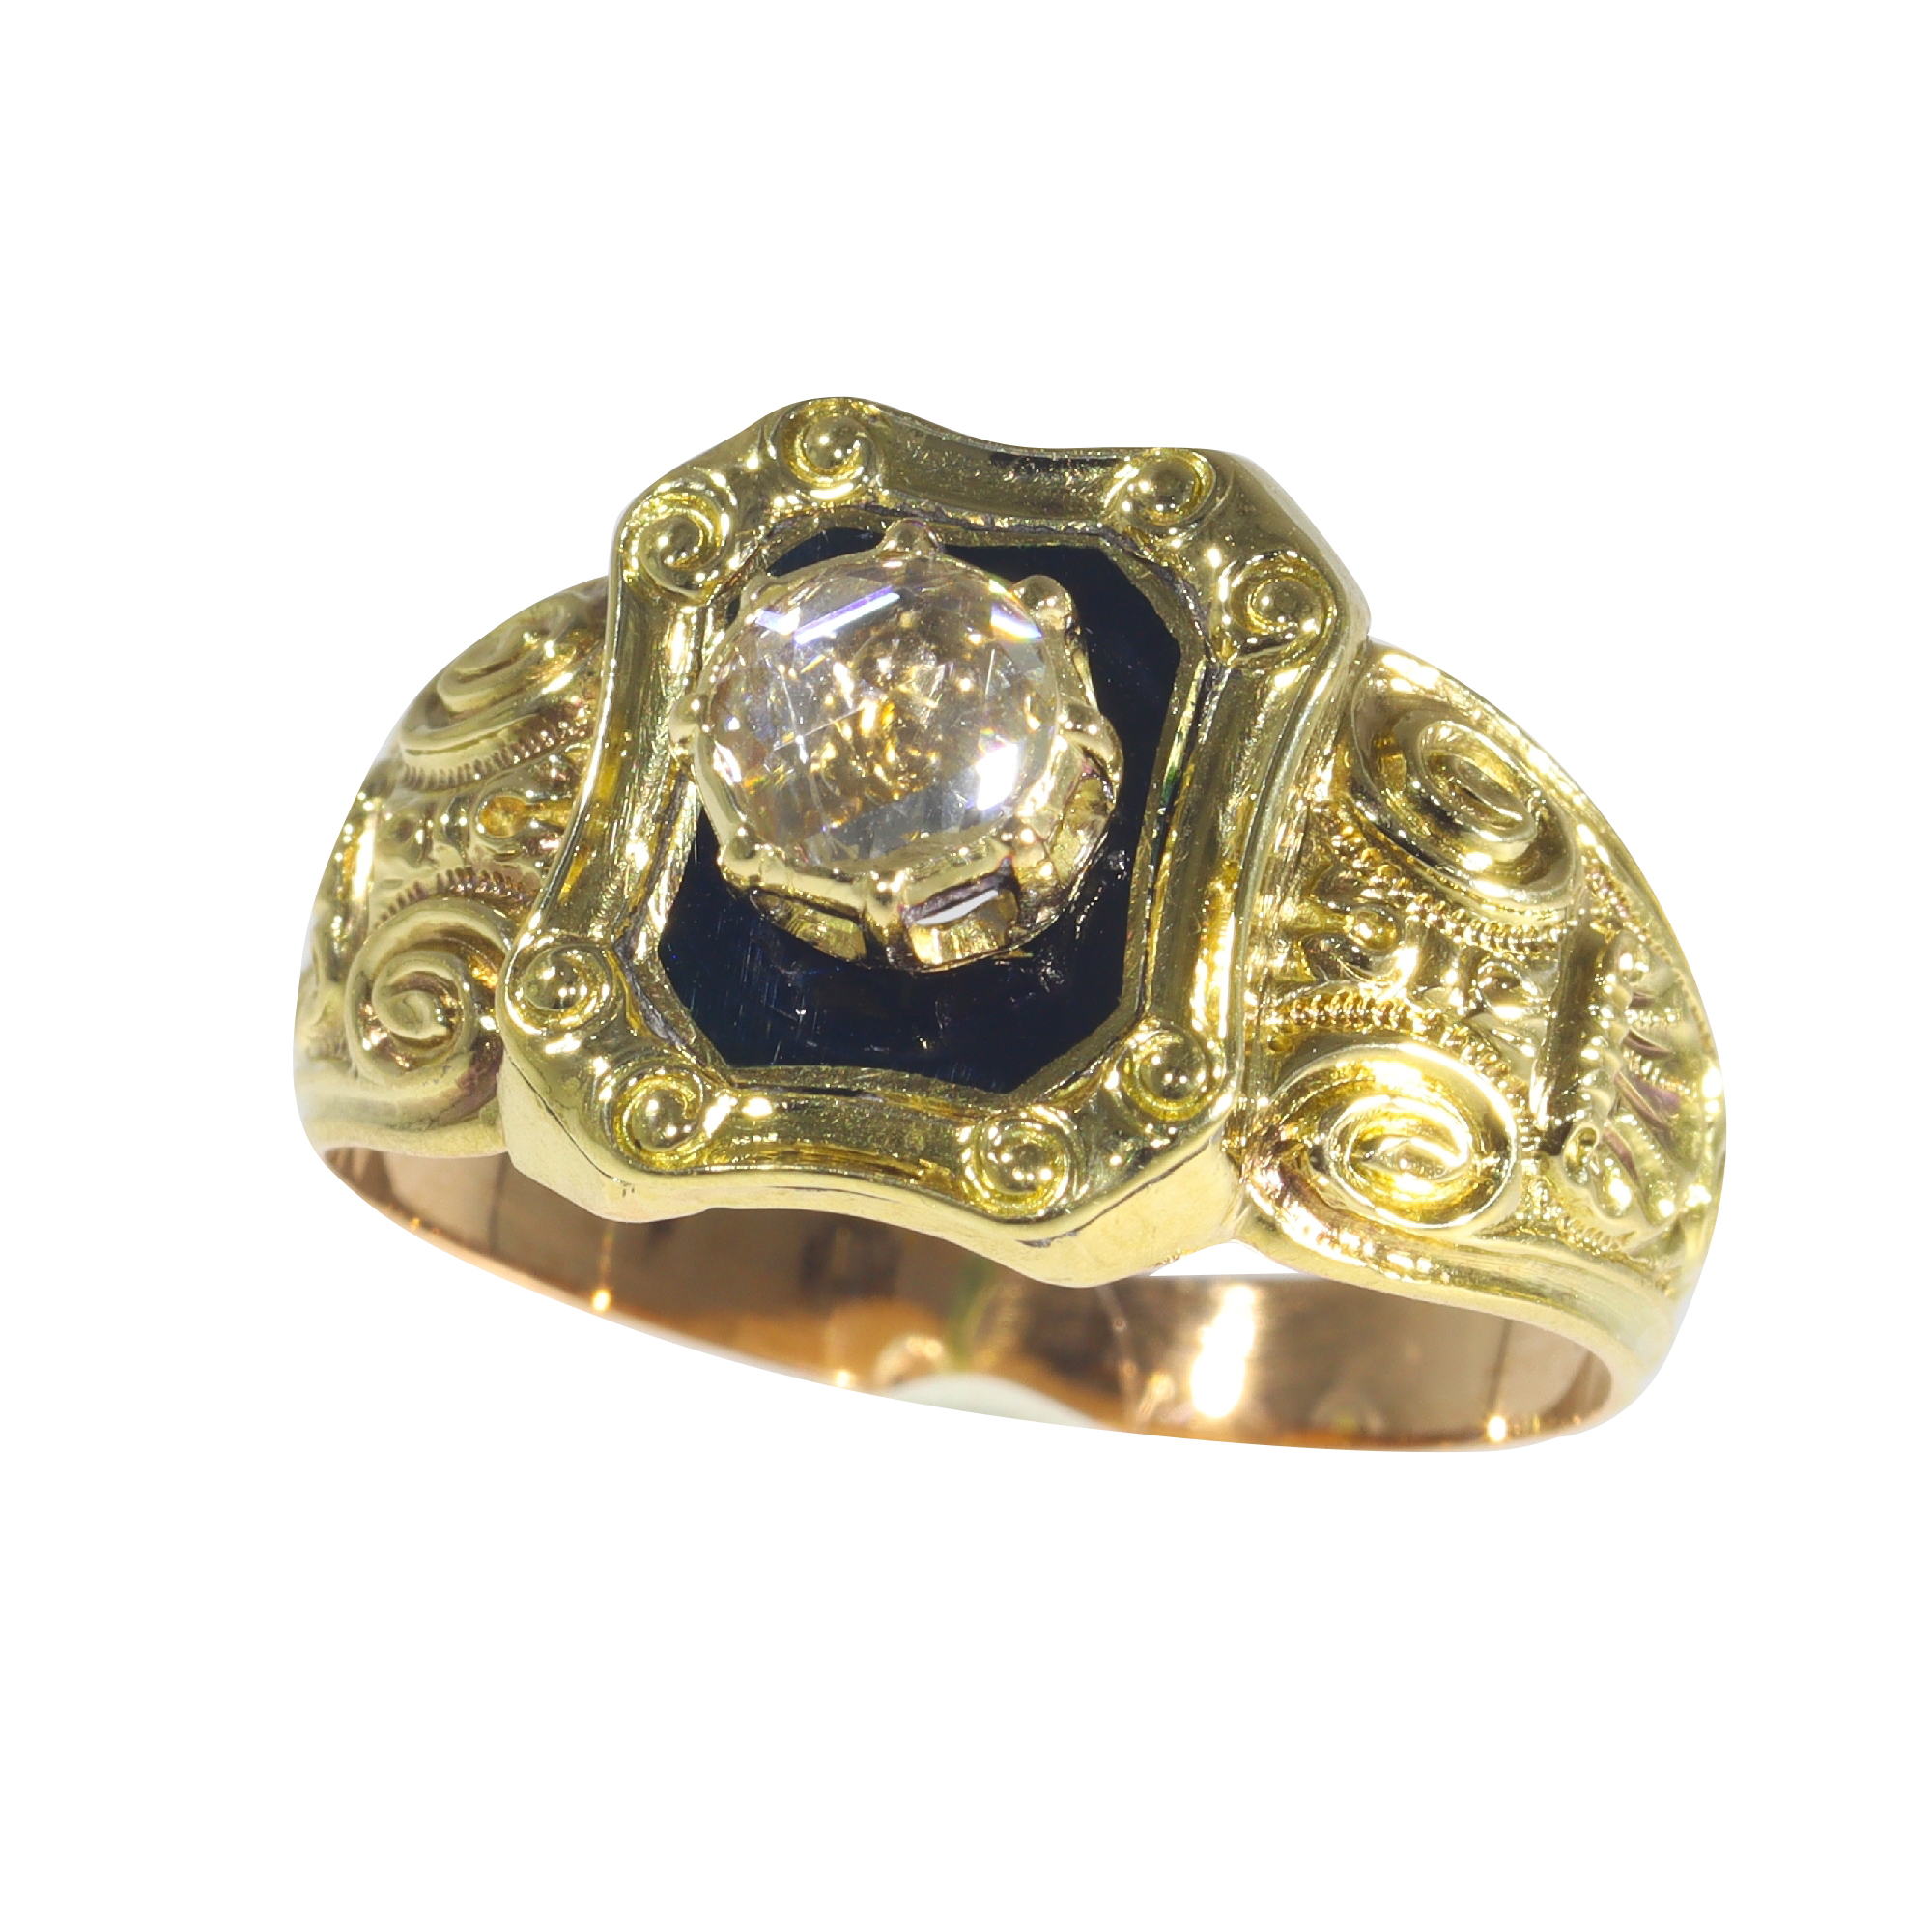 Antique early Victorian diamond ring with black enamel